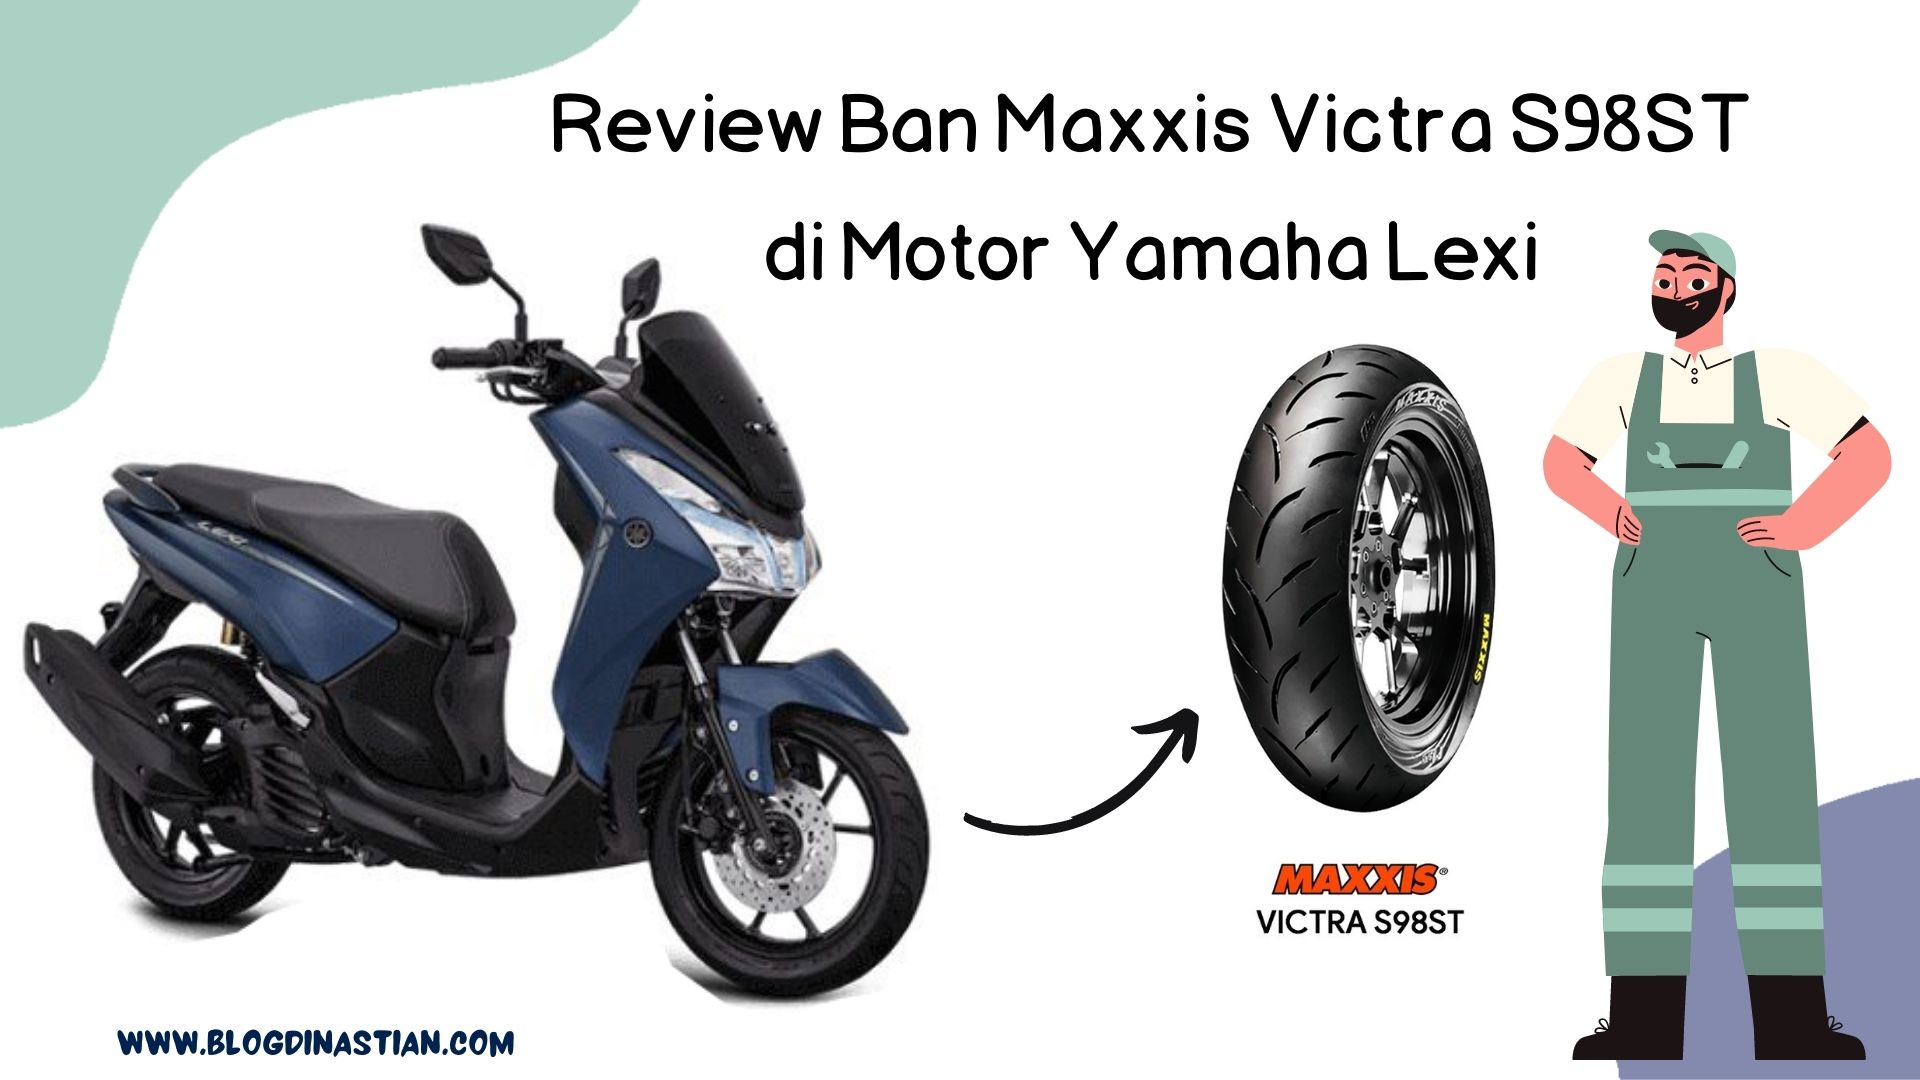 Review Ban Maxxis Victra S98ST